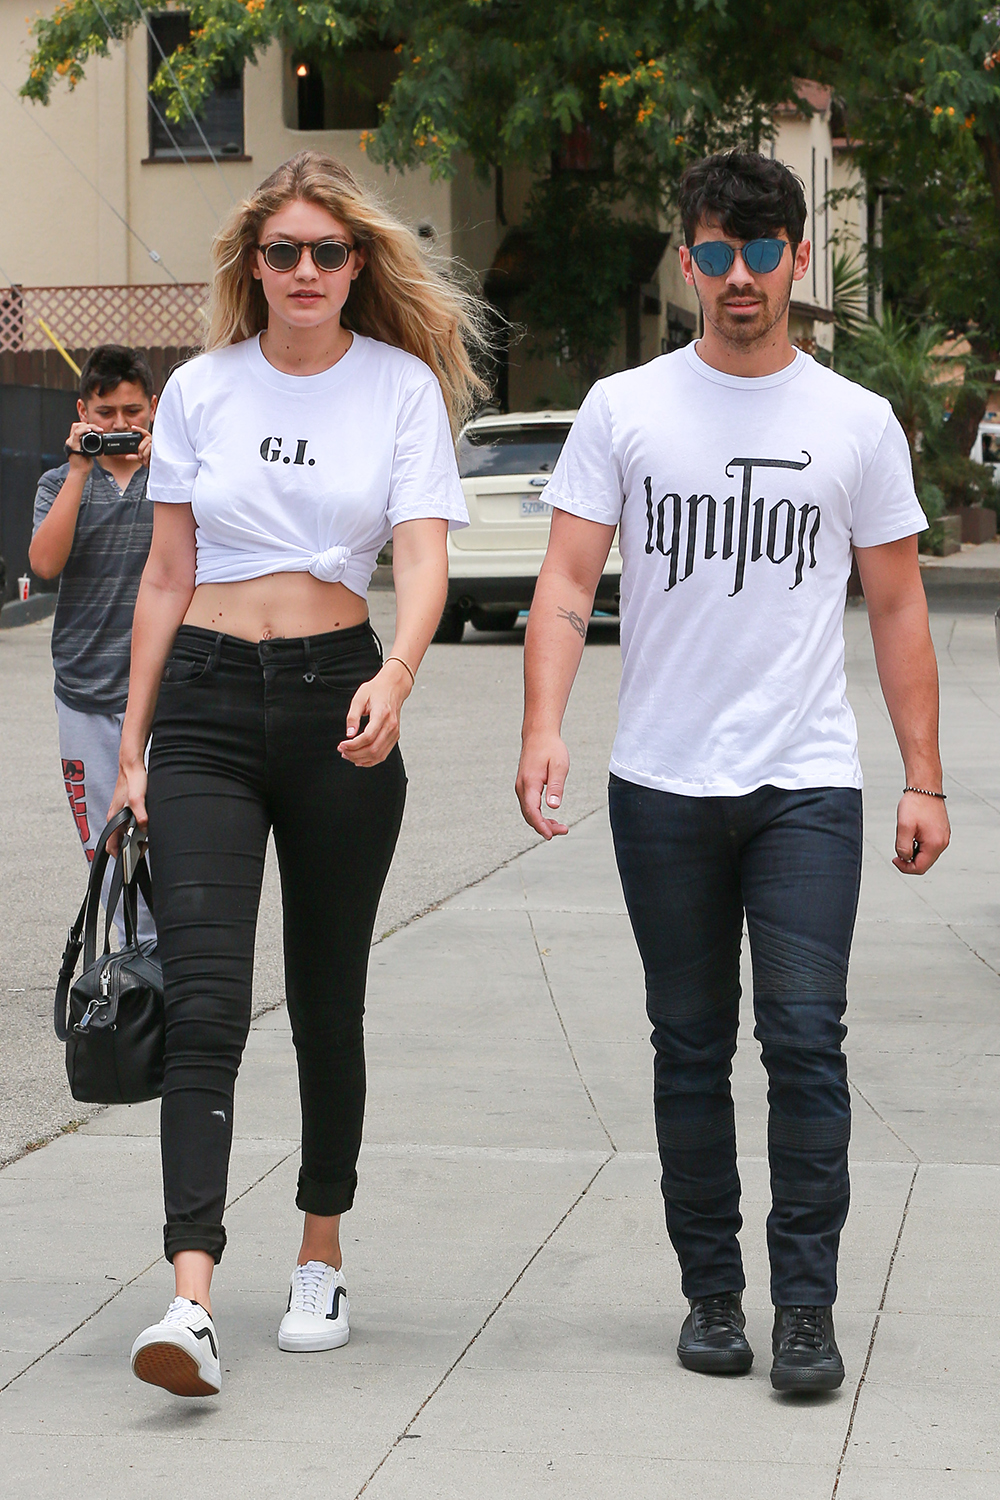 Their romance may have been brief but we couldn't get enough of Gigi and her previous beau Joe Jonas aka GI JO. The couple stayed together for five months before calling it quits in November 2015.